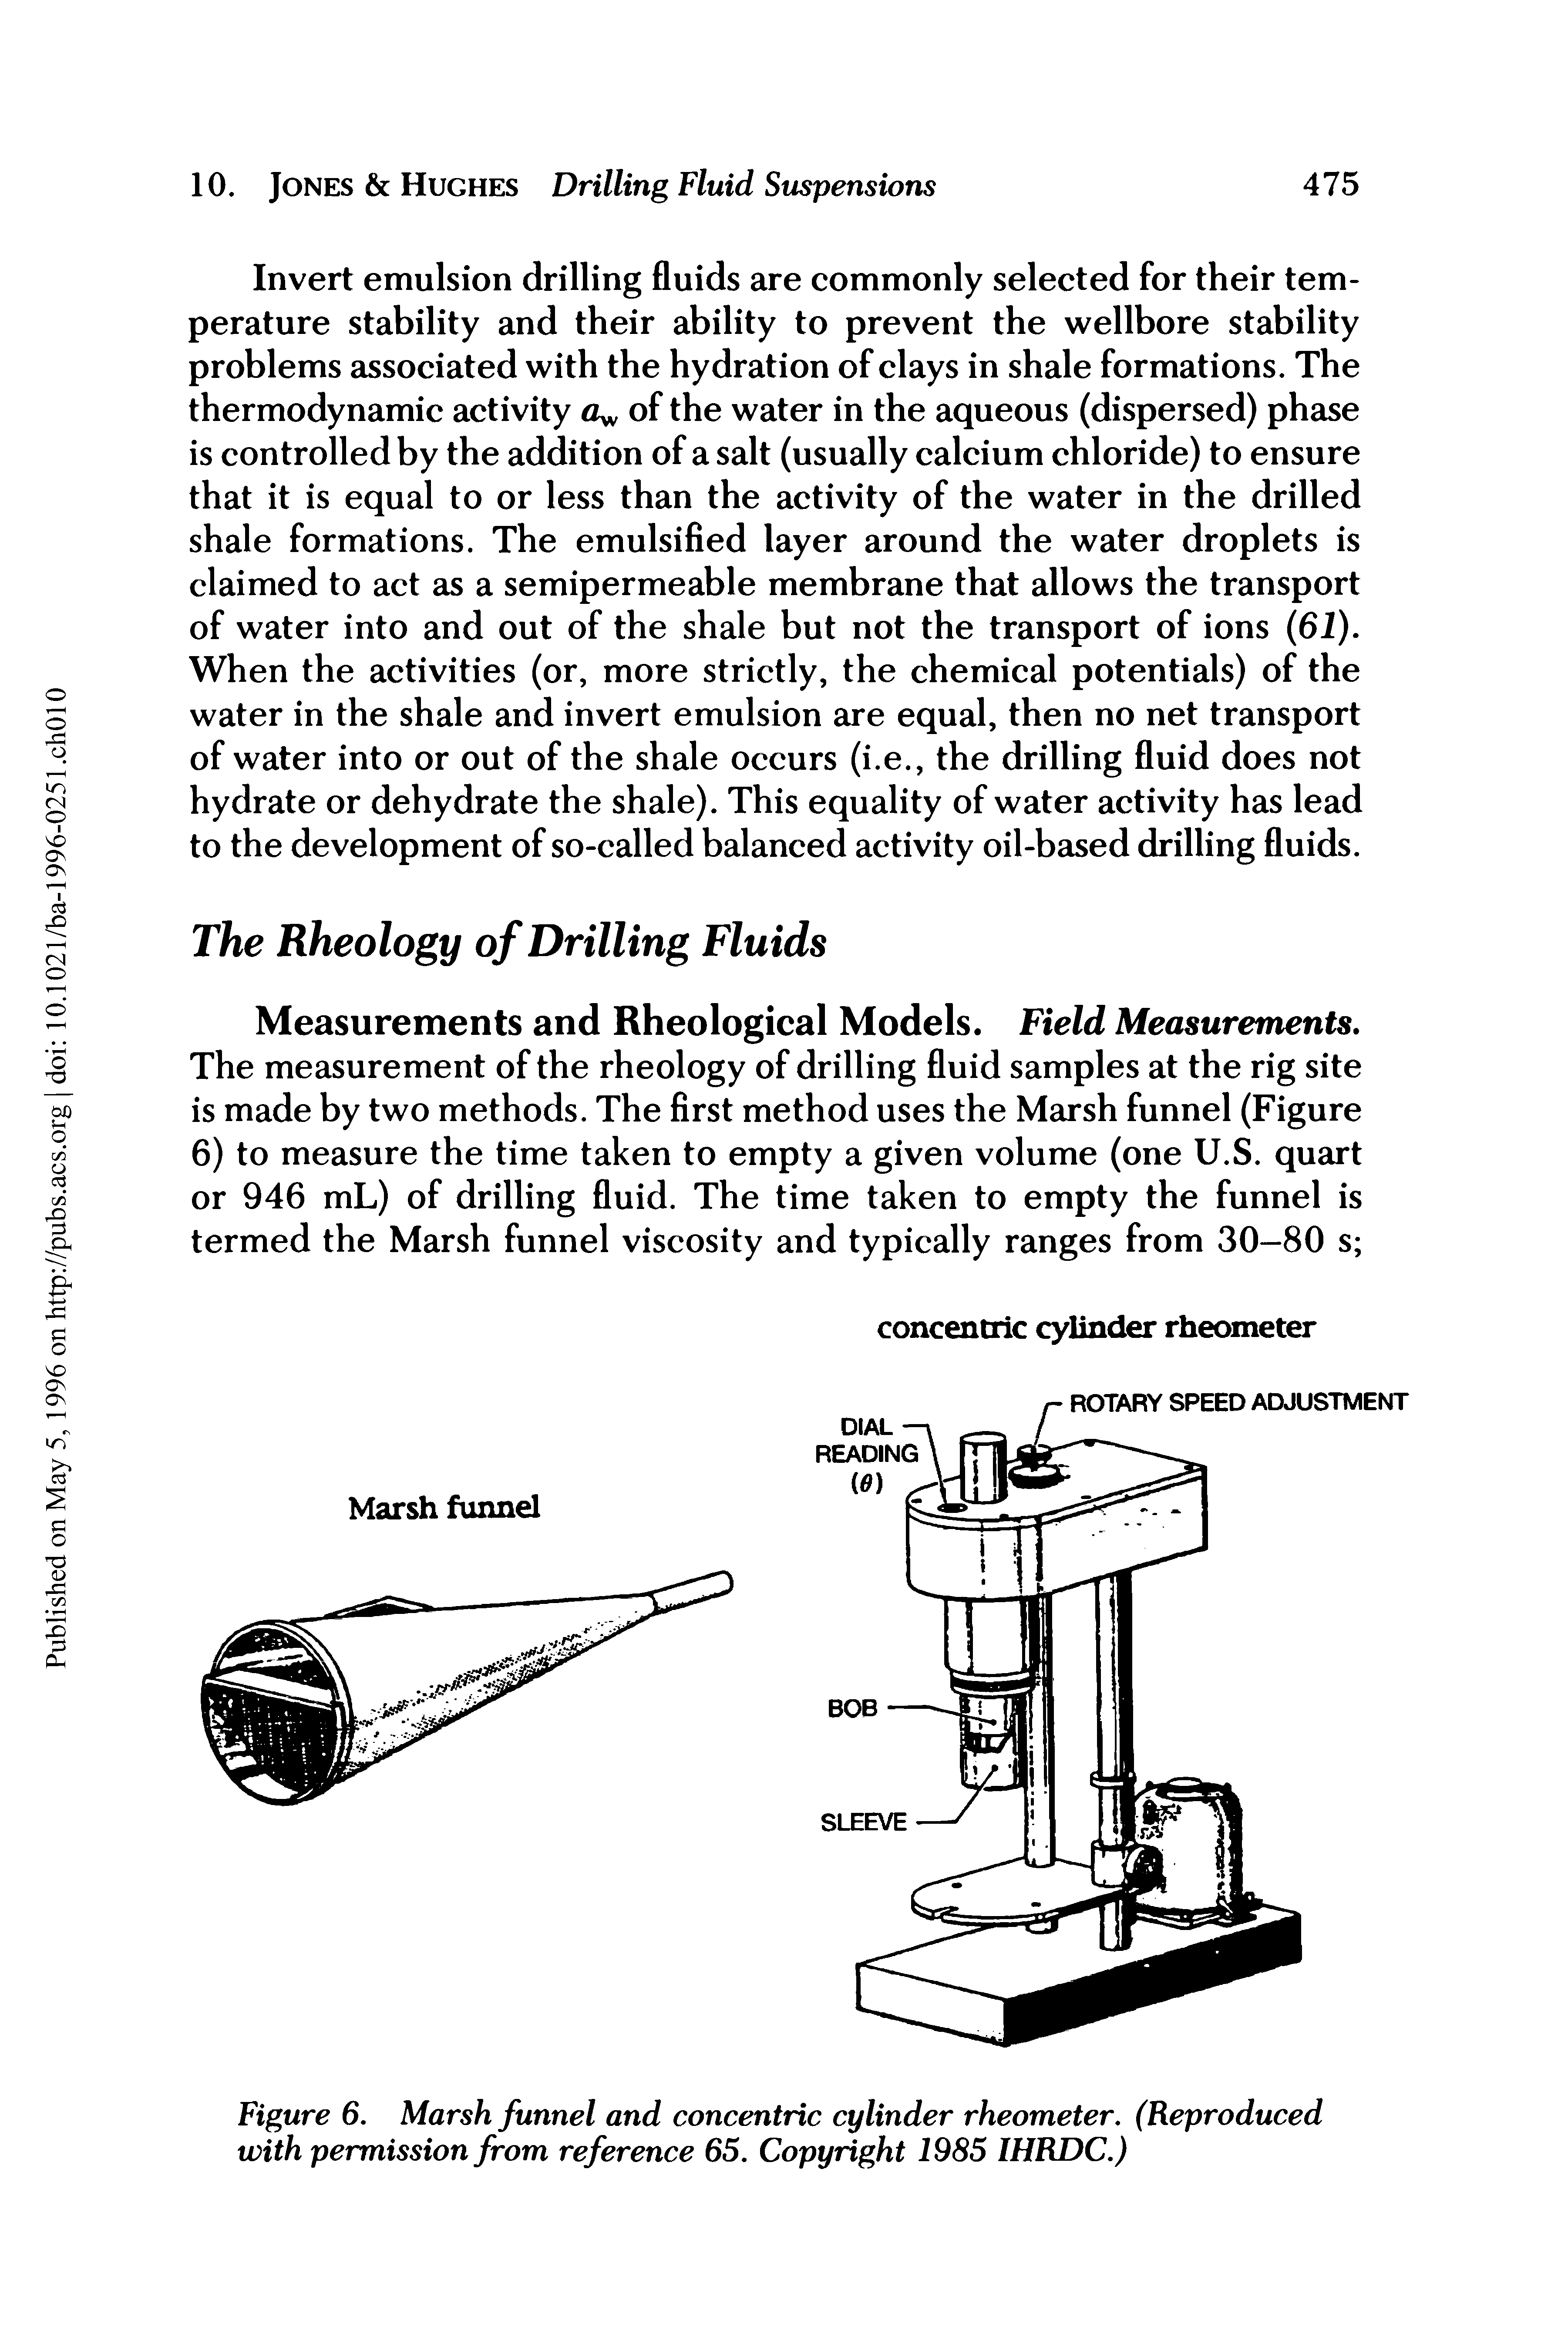 Figure 6. Marsh funnel and concentric cylinder rheometer. (Reproduced with permission from reference 65. Copyright 1985 IHRDC.)...